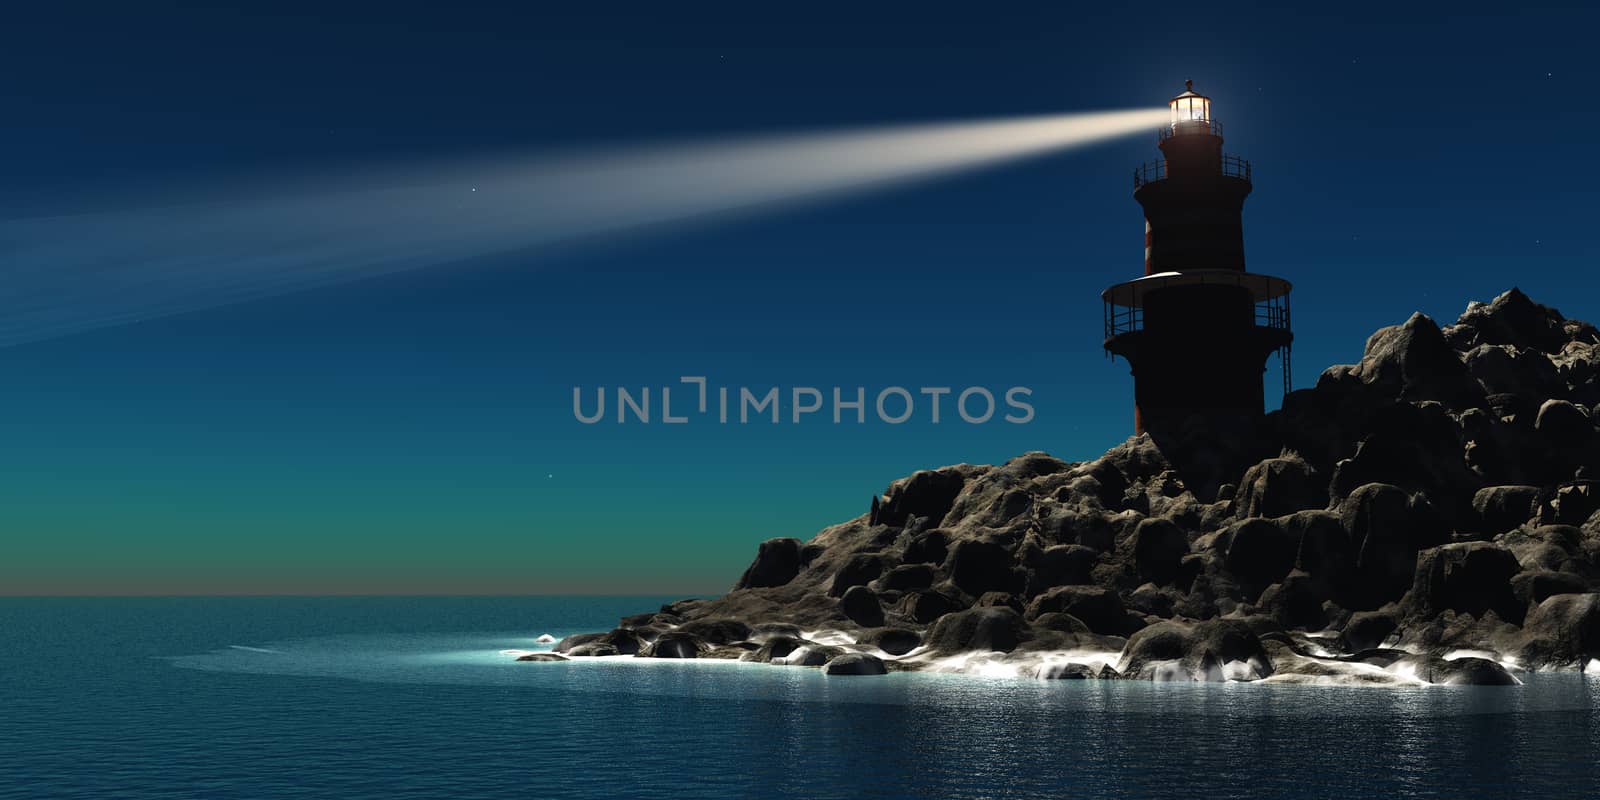 A red and white lighthouse guides sailors and boatmen away from the rocky shoreline.